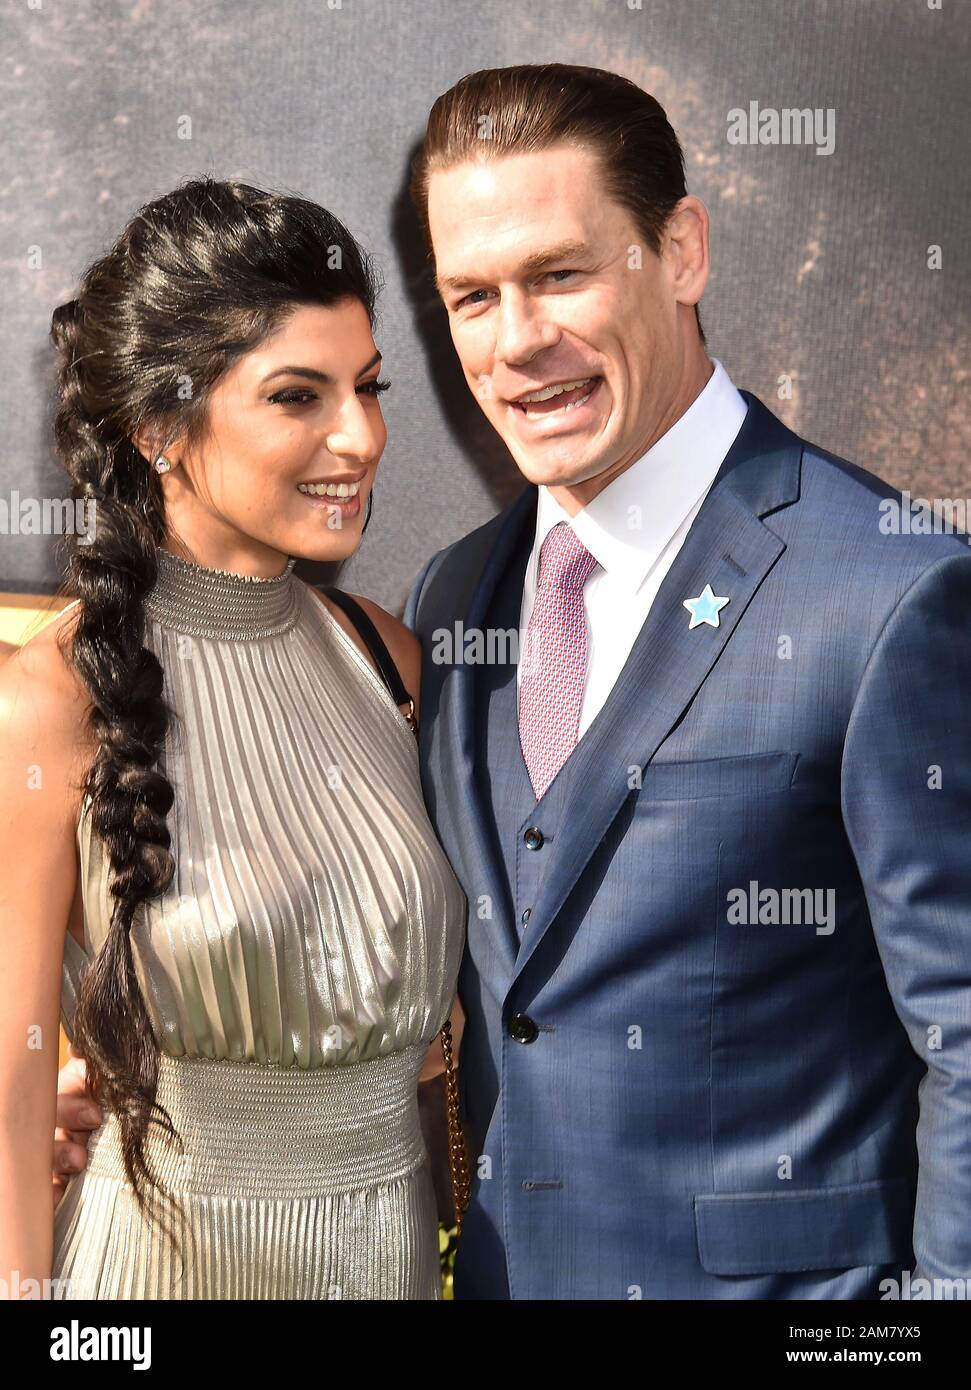 WESTWOOD, CA - JANUARY 11: Shay Shariatzadeh (L) and John Cena attend the  Premiere of Universal Pictures' "Dolittle" at Regency Village Theatre on  January 11, 2020 in Westwood, California Stock Photo - Alamy